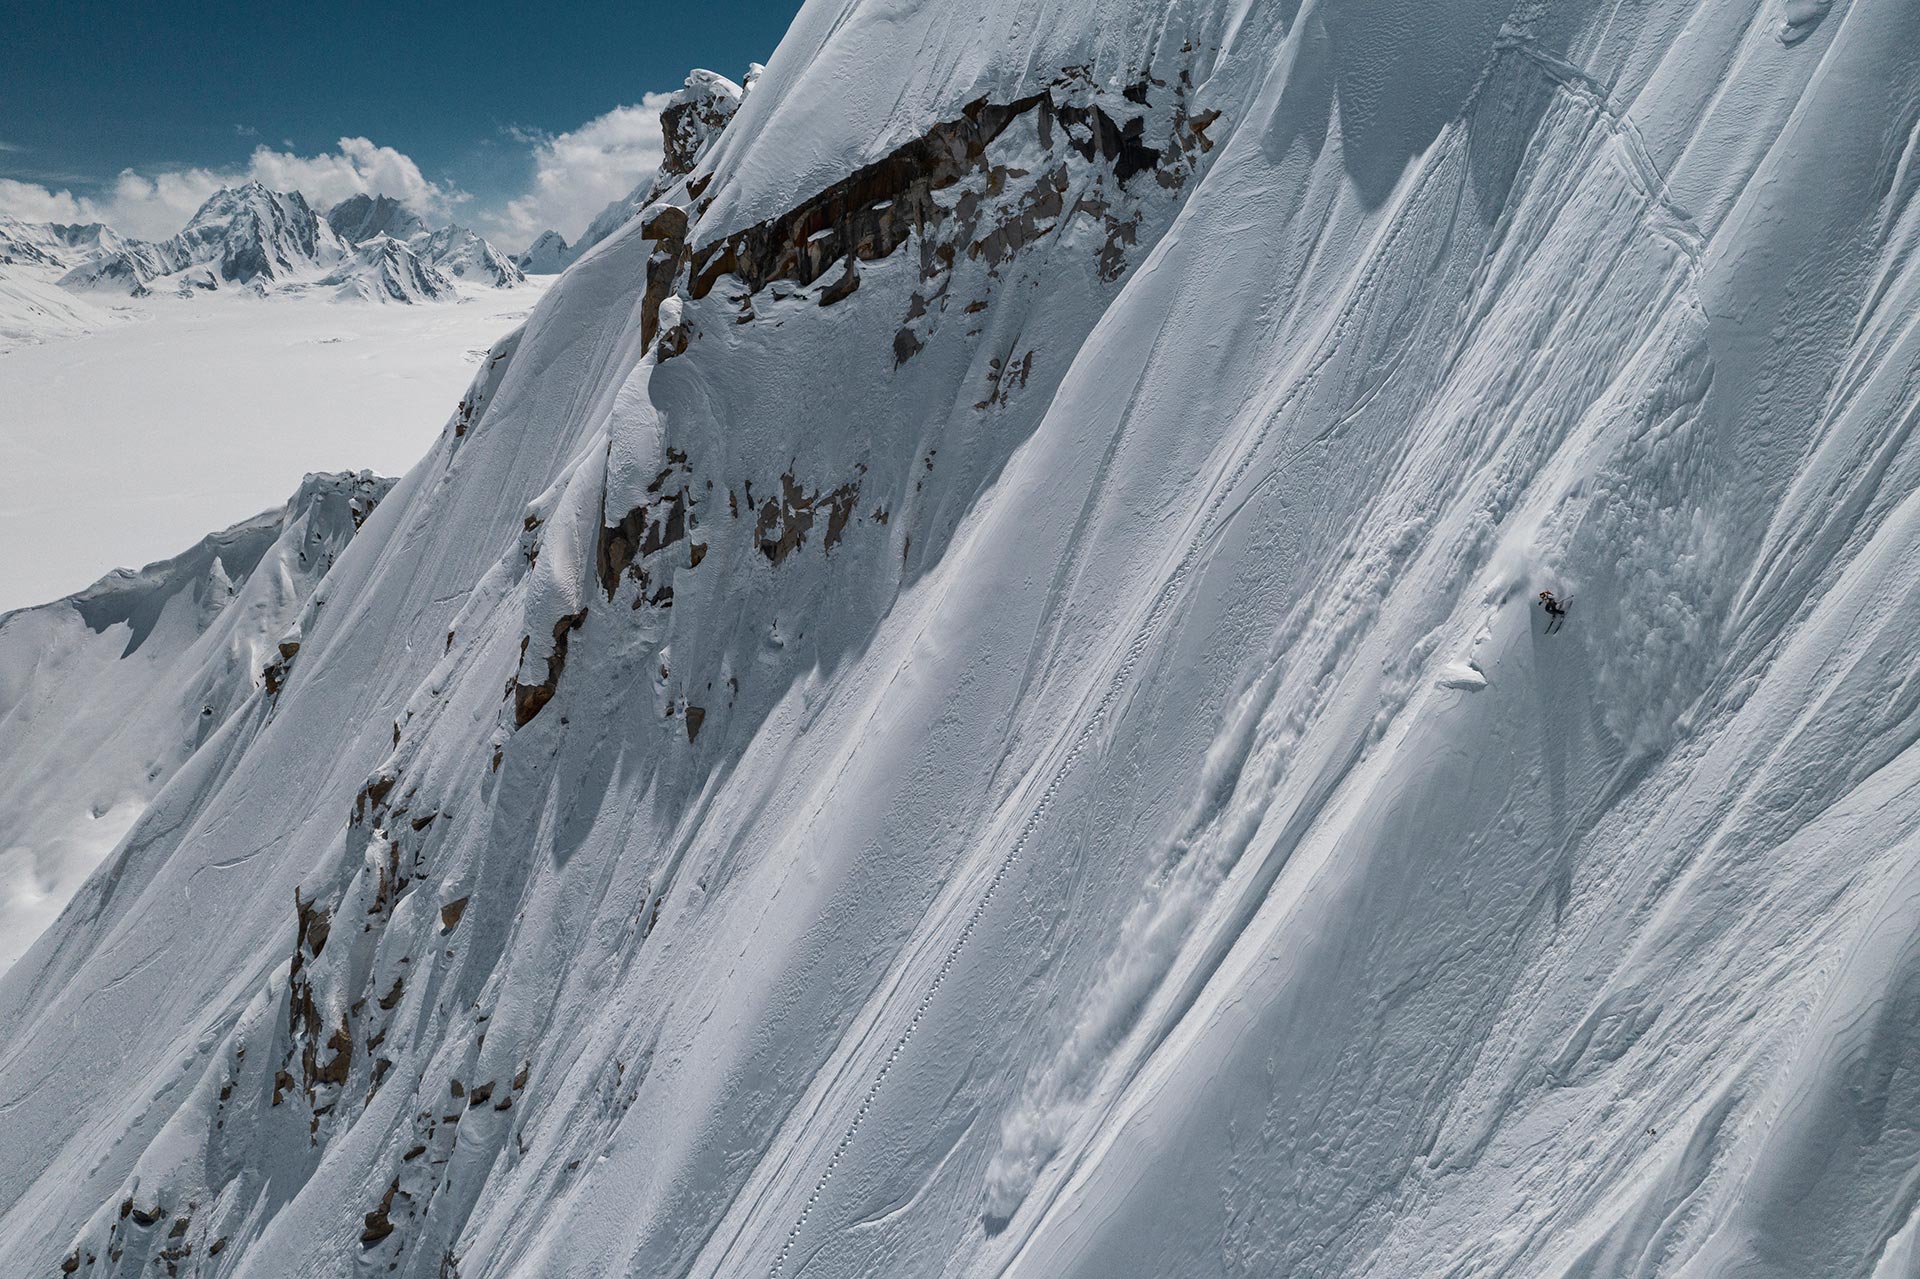 Jeremie Heitz skiing in Pakistan for the filming of La Liste: Everything or Nothing